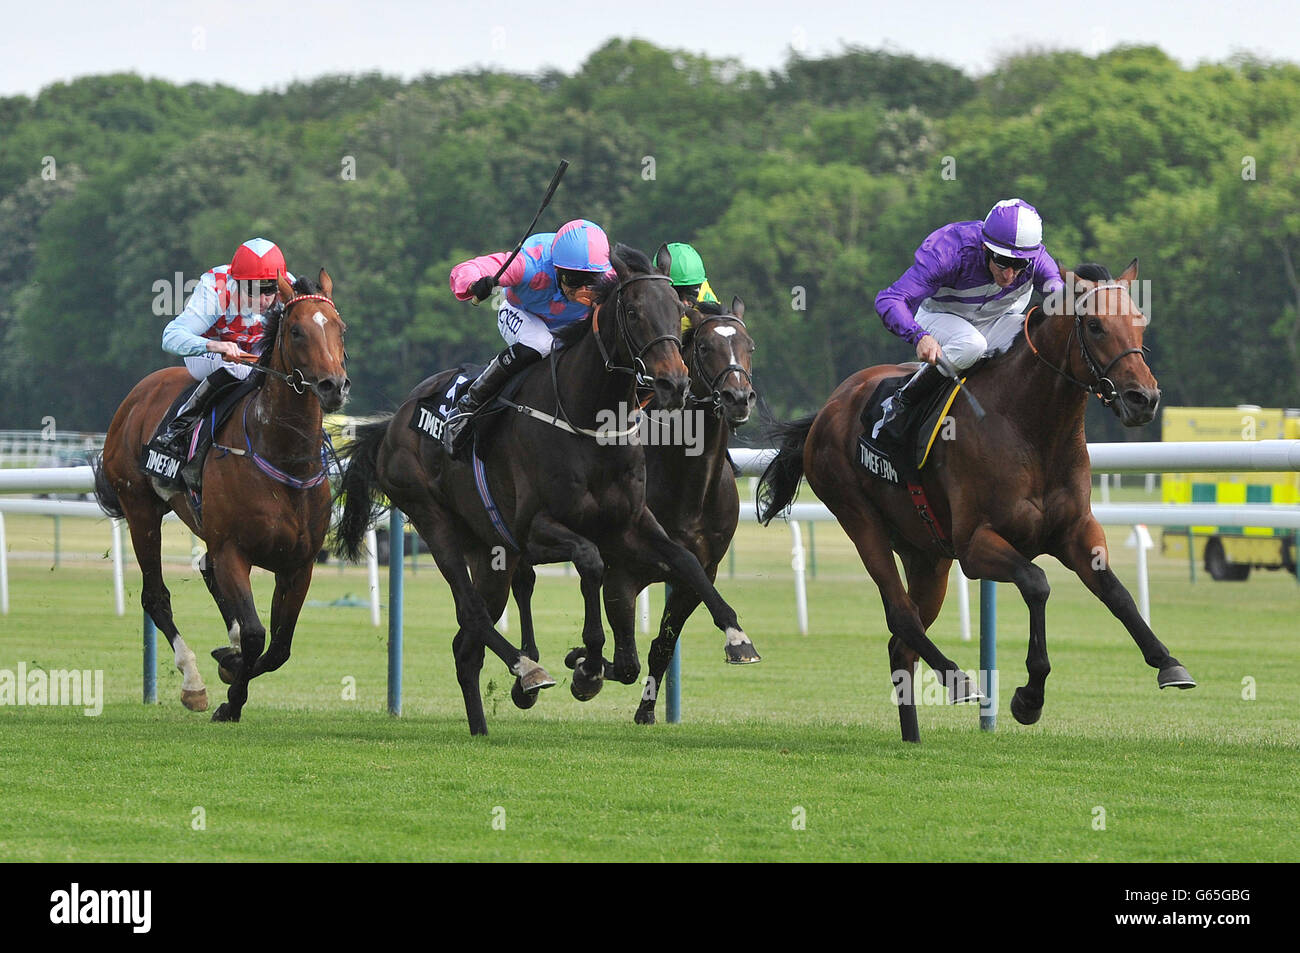 Amarillo ridden by Andrasch Starke (right) beats Pastoral Player ridden by Graham Lee to win the Timeform Jury Stakes (registered as The John of Gaunt Stakes) during Timeform Jury Stakes / Sandy Lane Stakes day at Haydock Park Racecourse, Newton-Le-Willows. Stock Photo